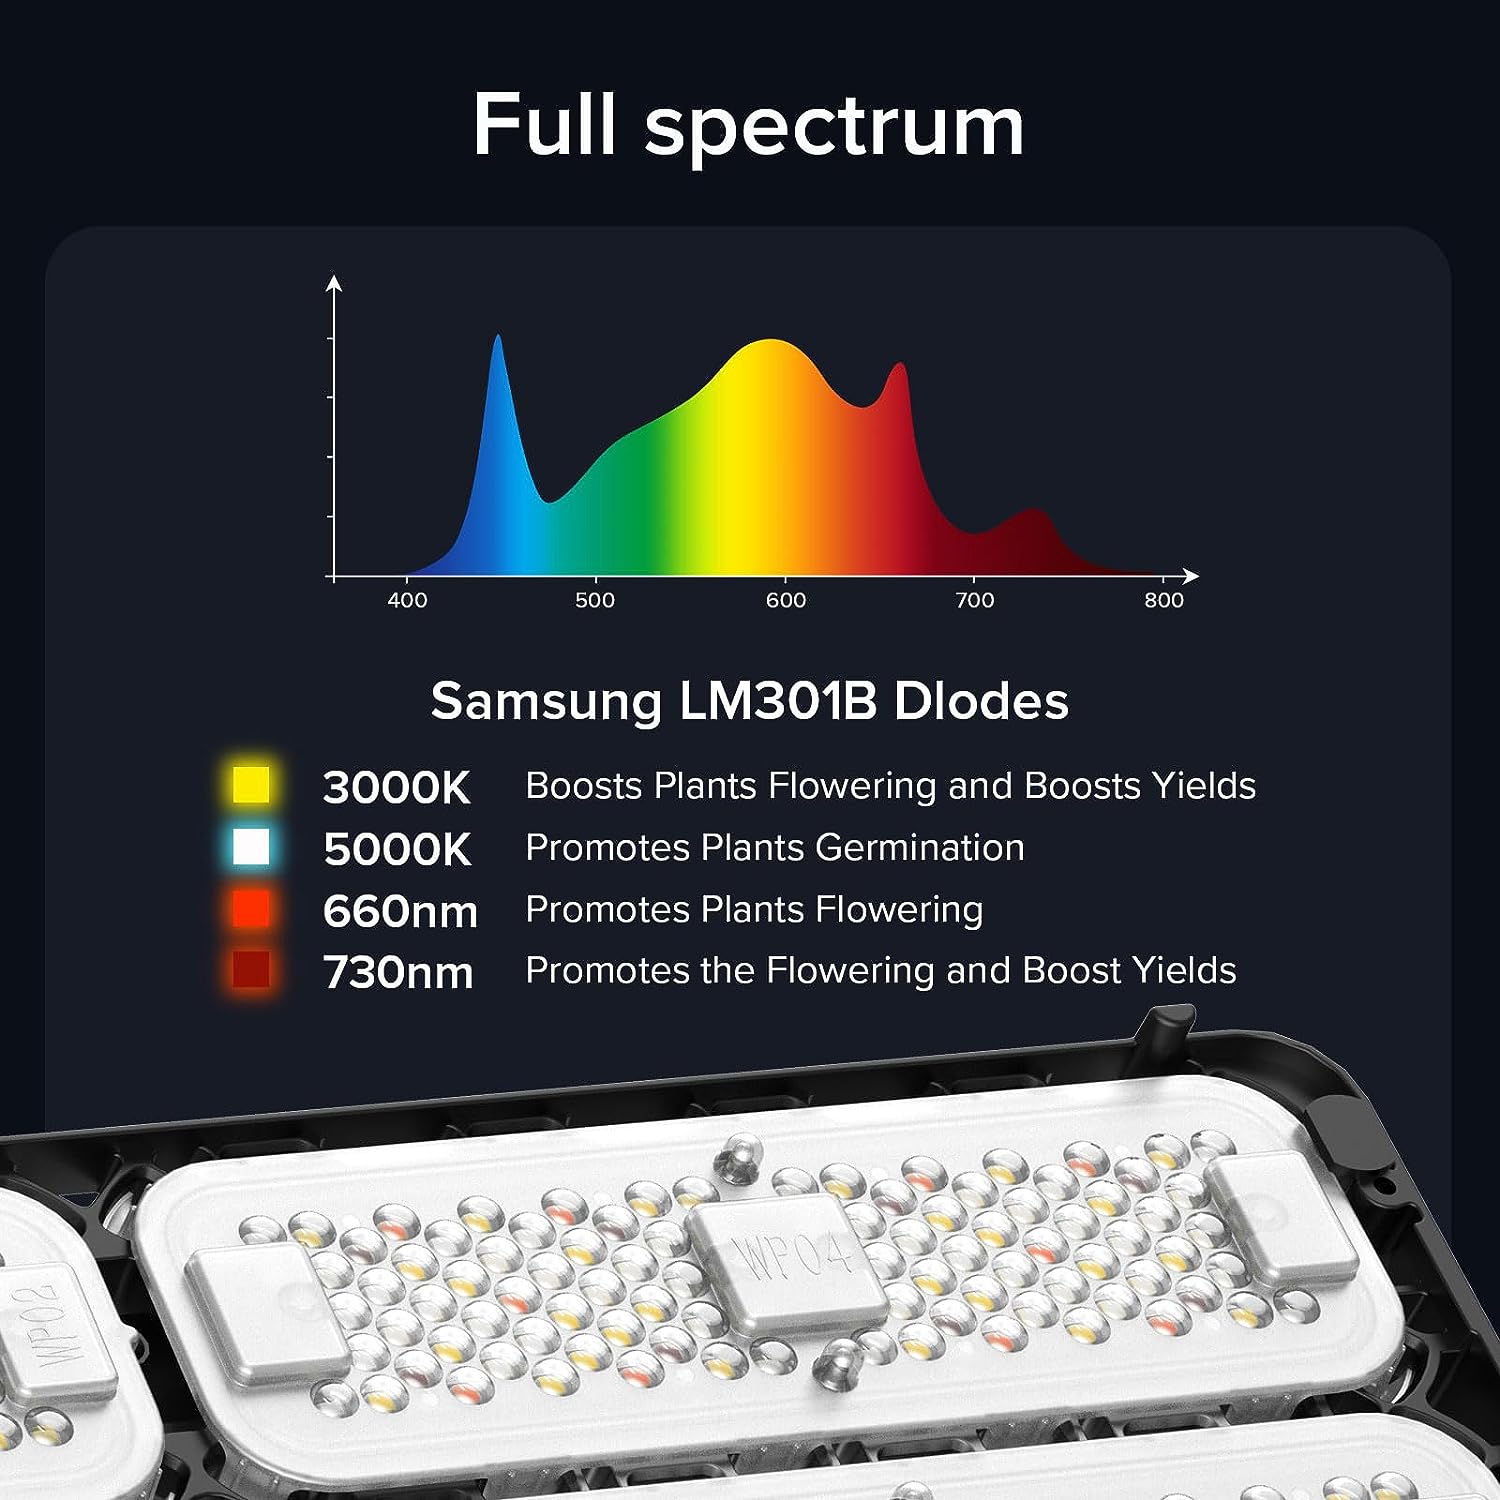 SANSI 2200W LED Grow Light with High PPFD Samsung LM301B Diodes Dimmable Lights Full Spectrum Plant Growing Lamps Greenhouse Hydroponics for Indoor Plants 2x4 3x3 Grow Tent Actual Power 200Watt